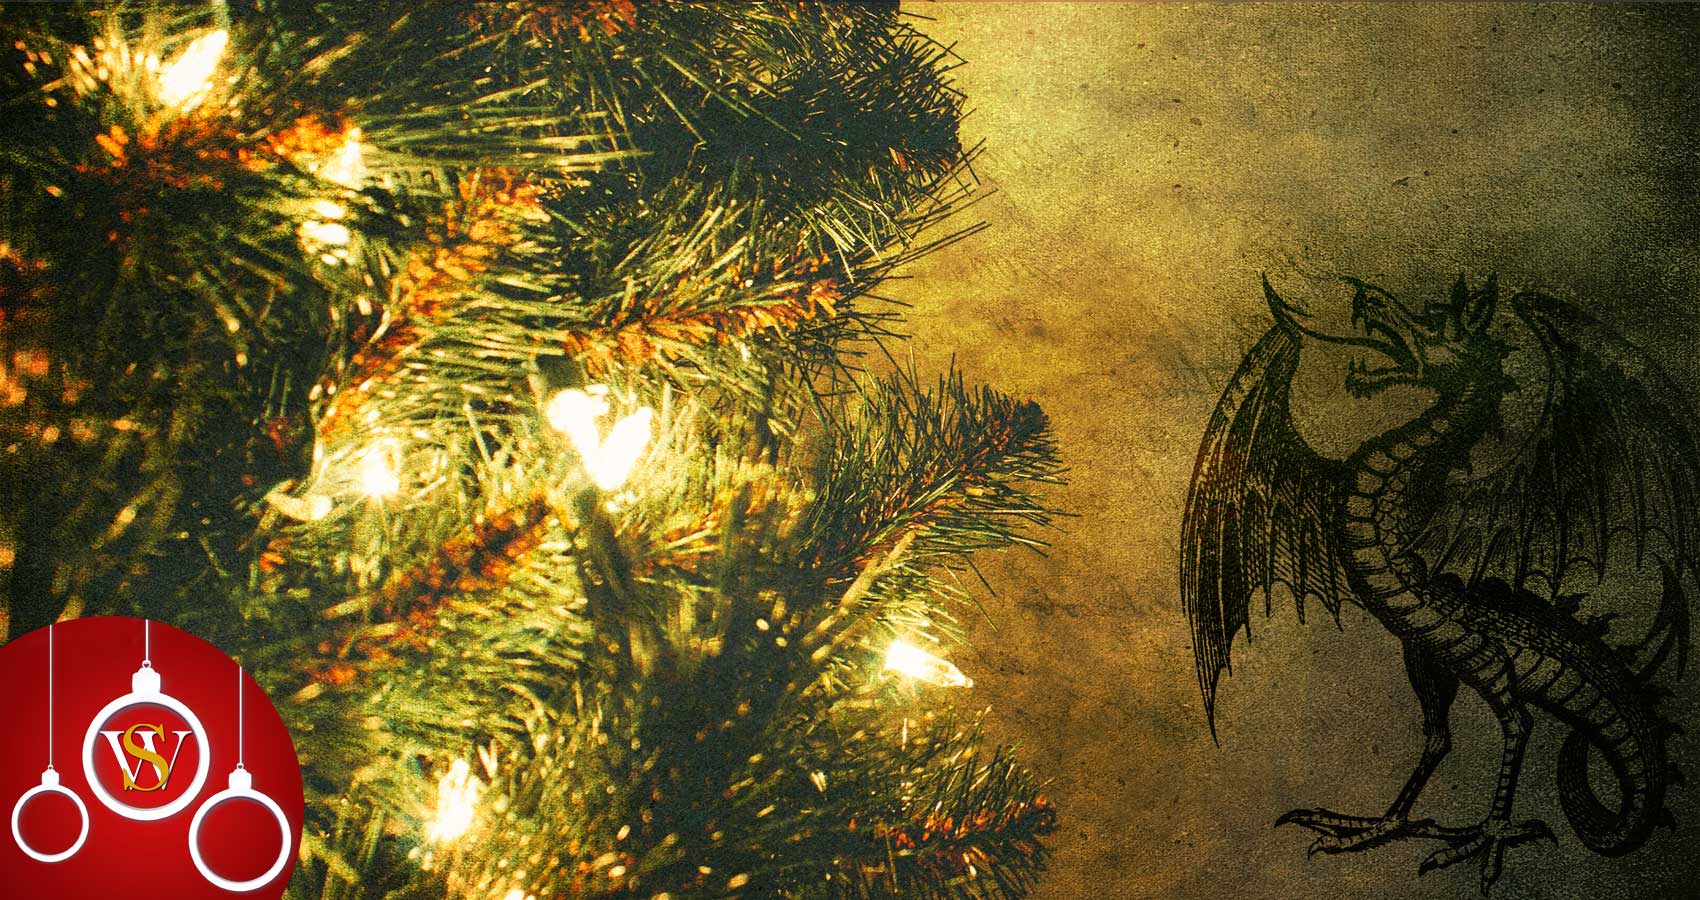 The Christmas Eve Dragon, story by Philippa Hawley at Spillwords.com